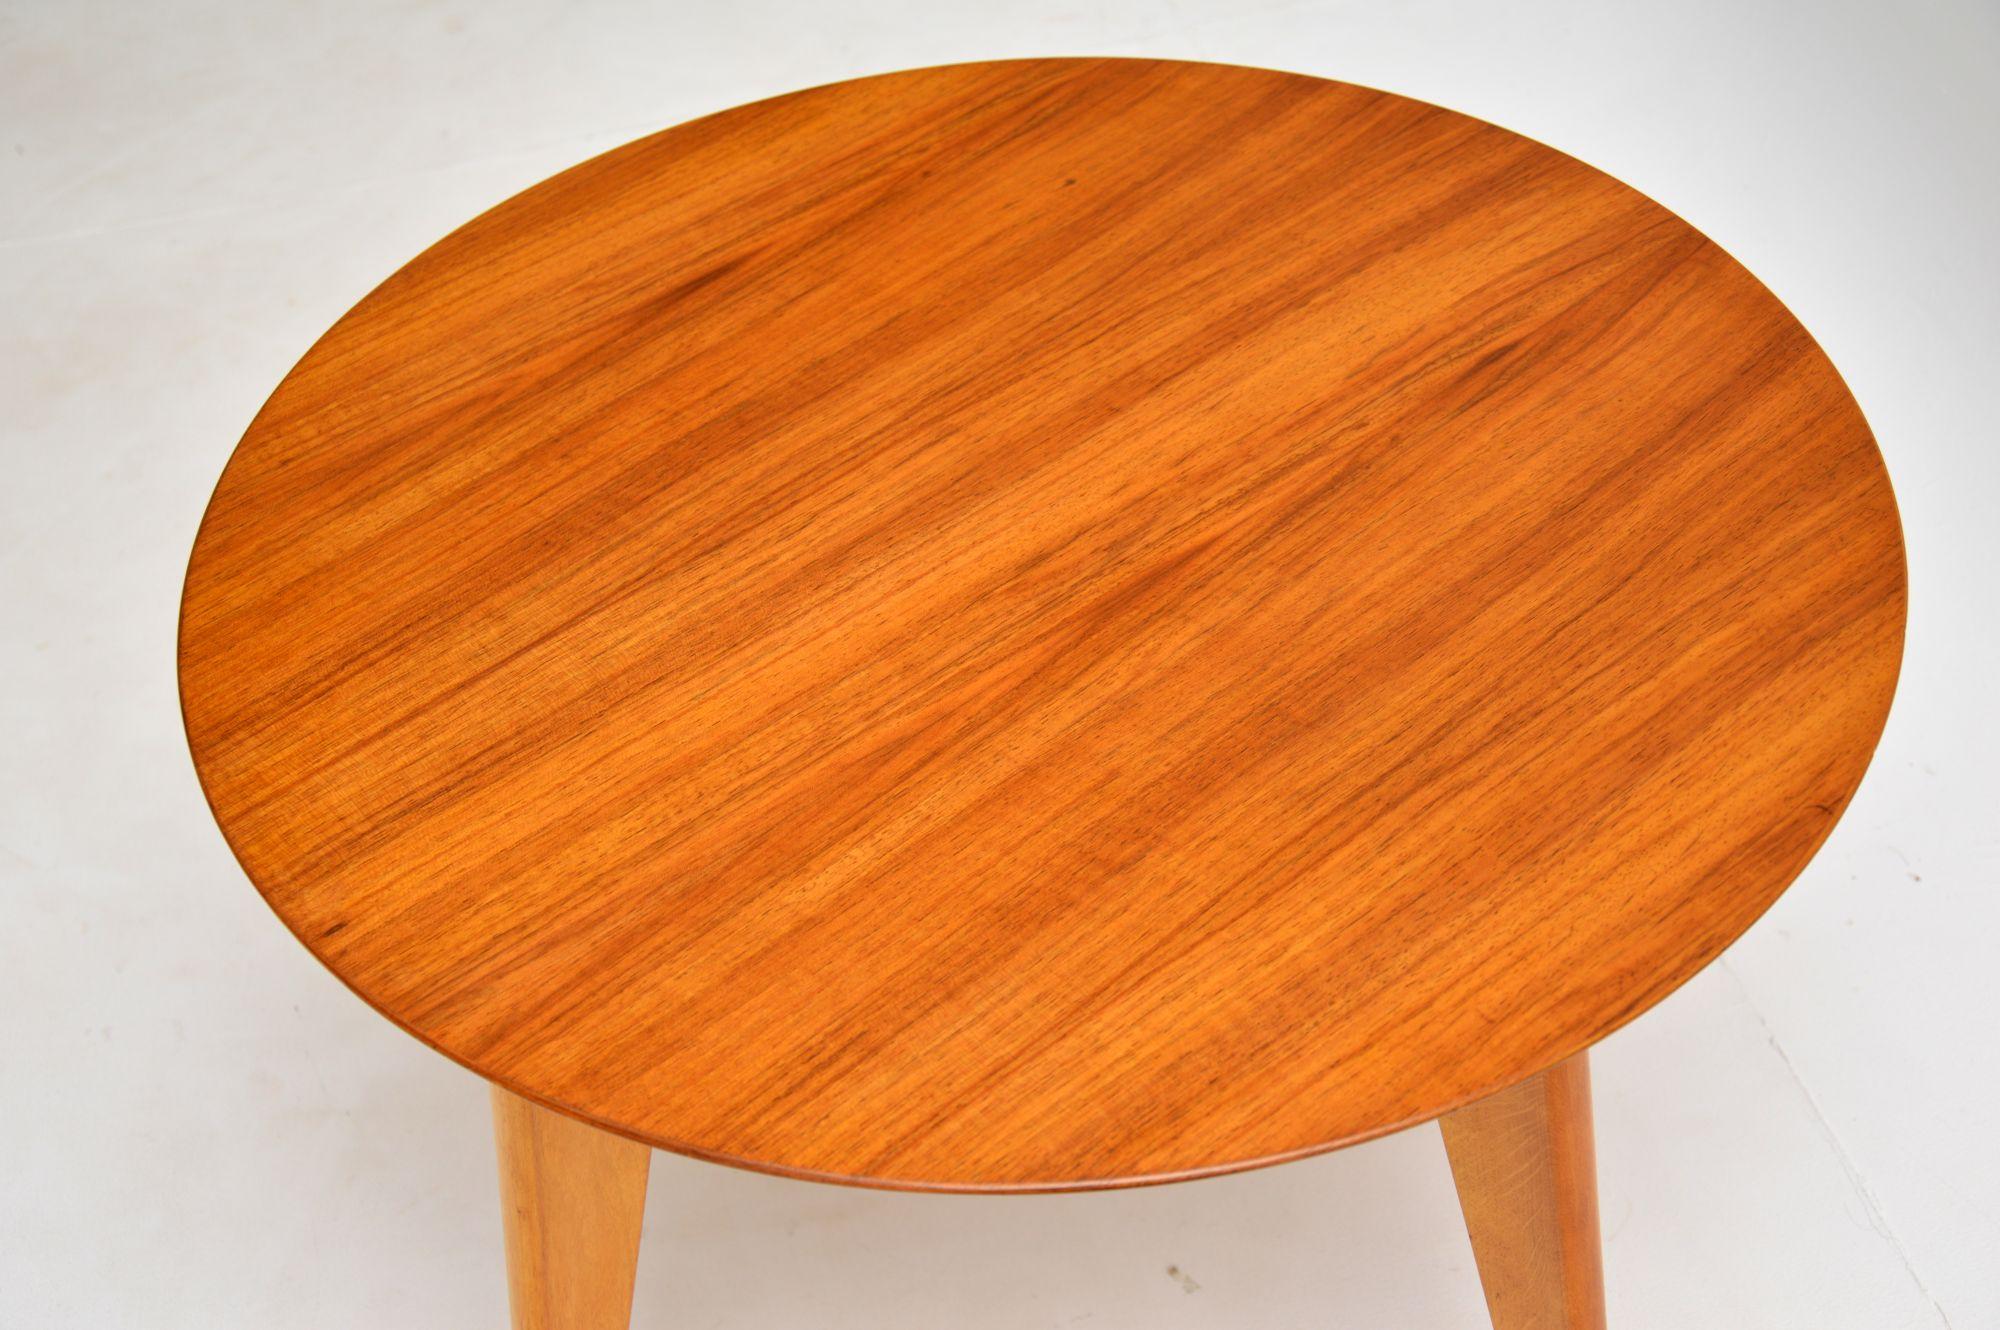 English 1960’s Vintage Walnut Coffee Table by H. Shaw